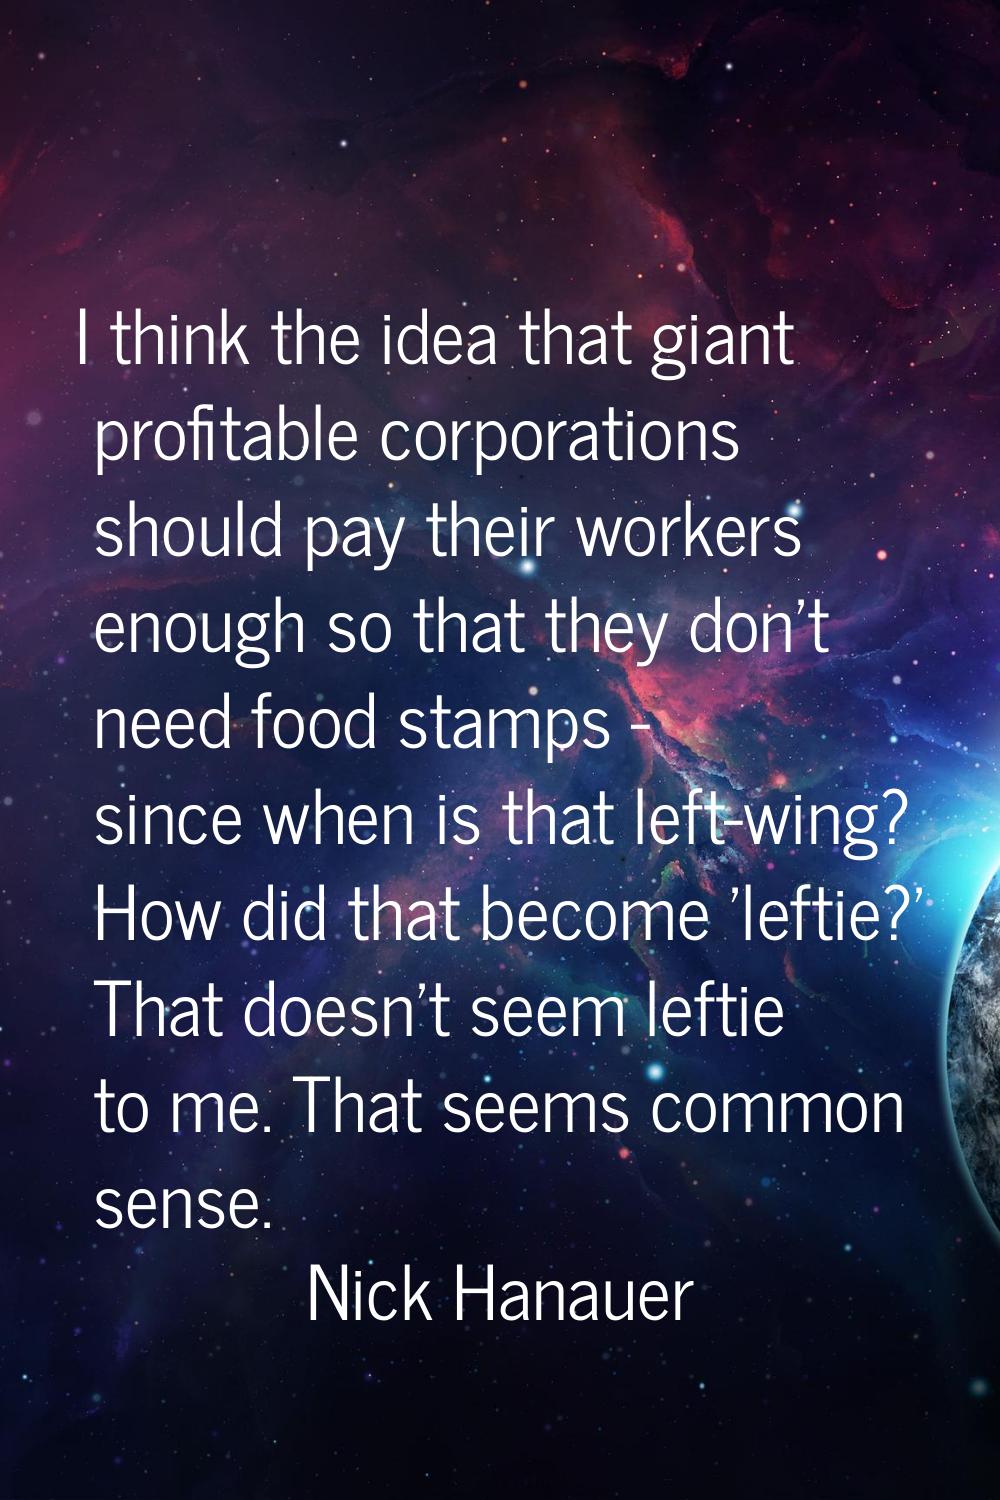 I think the idea that giant profitable corporations should pay their workers enough so that they do